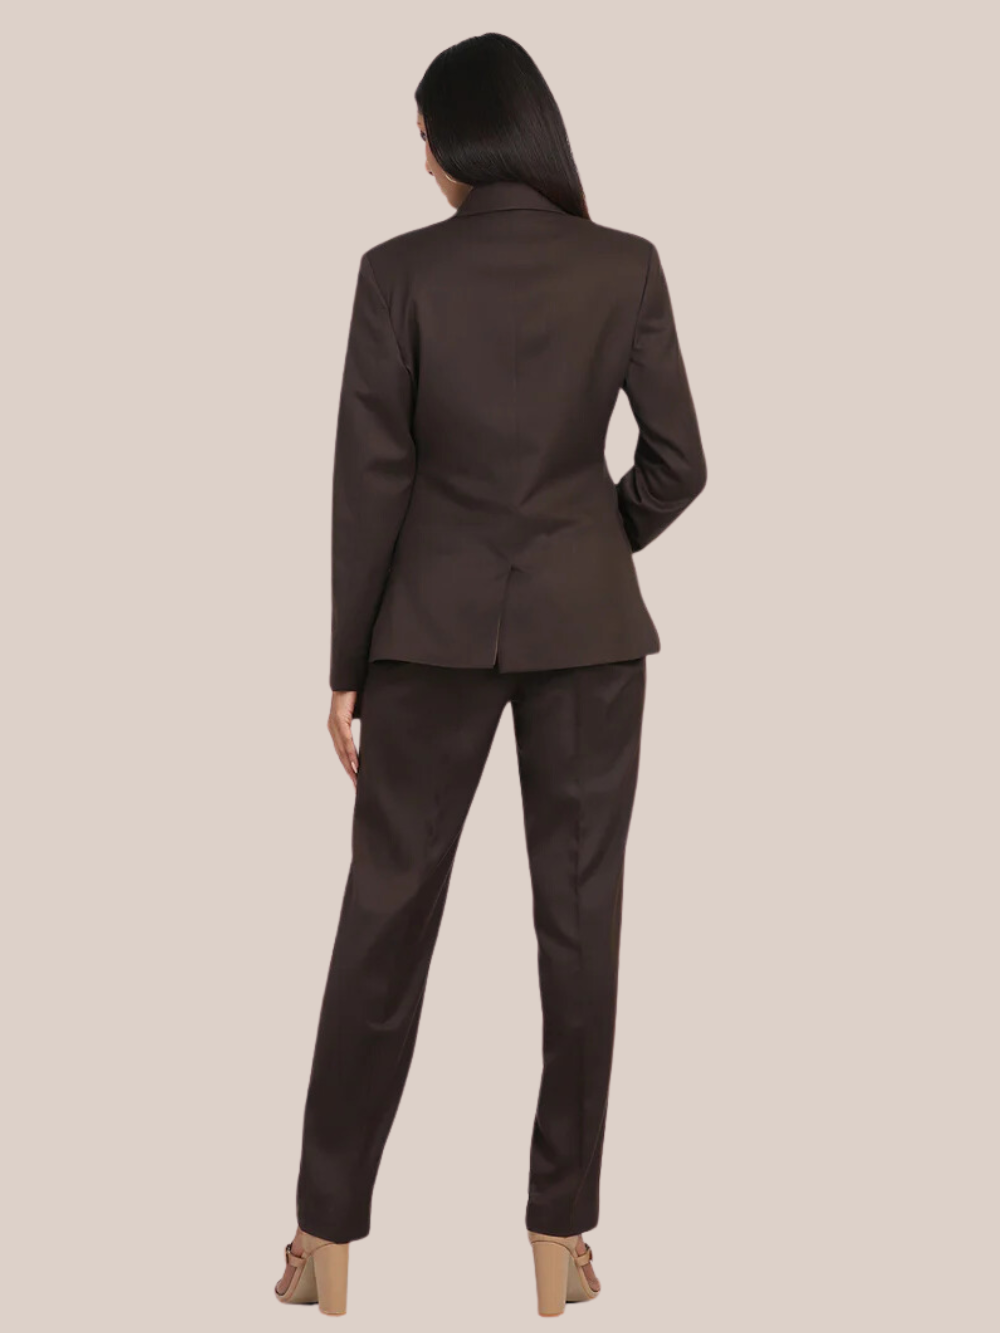 Poly Cotton Pant Suit - Chocolate Brown